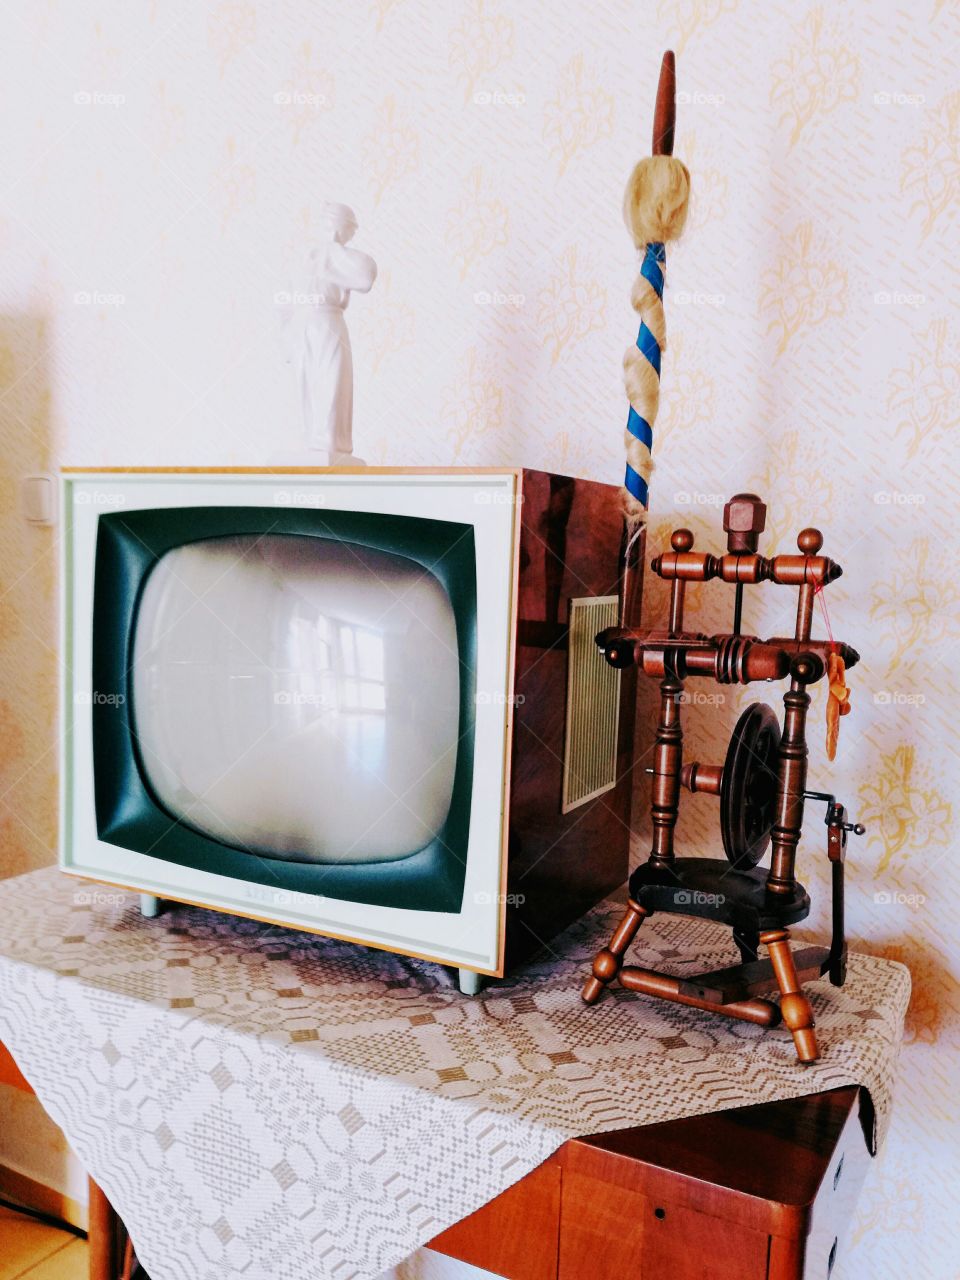 Very old television